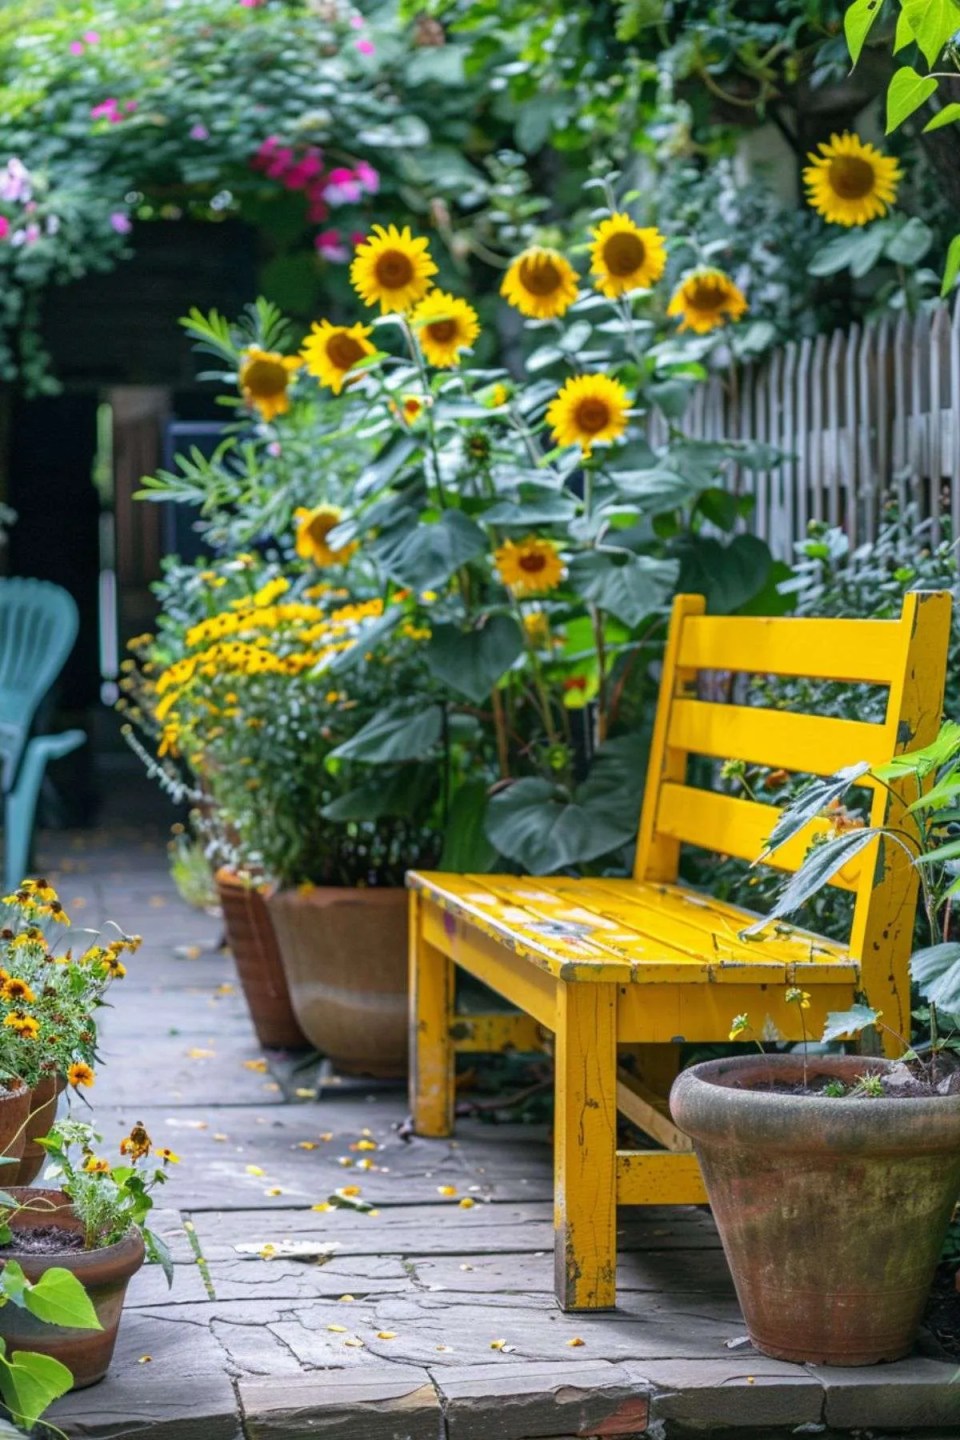 a garden with sunflowers and a yellow bench